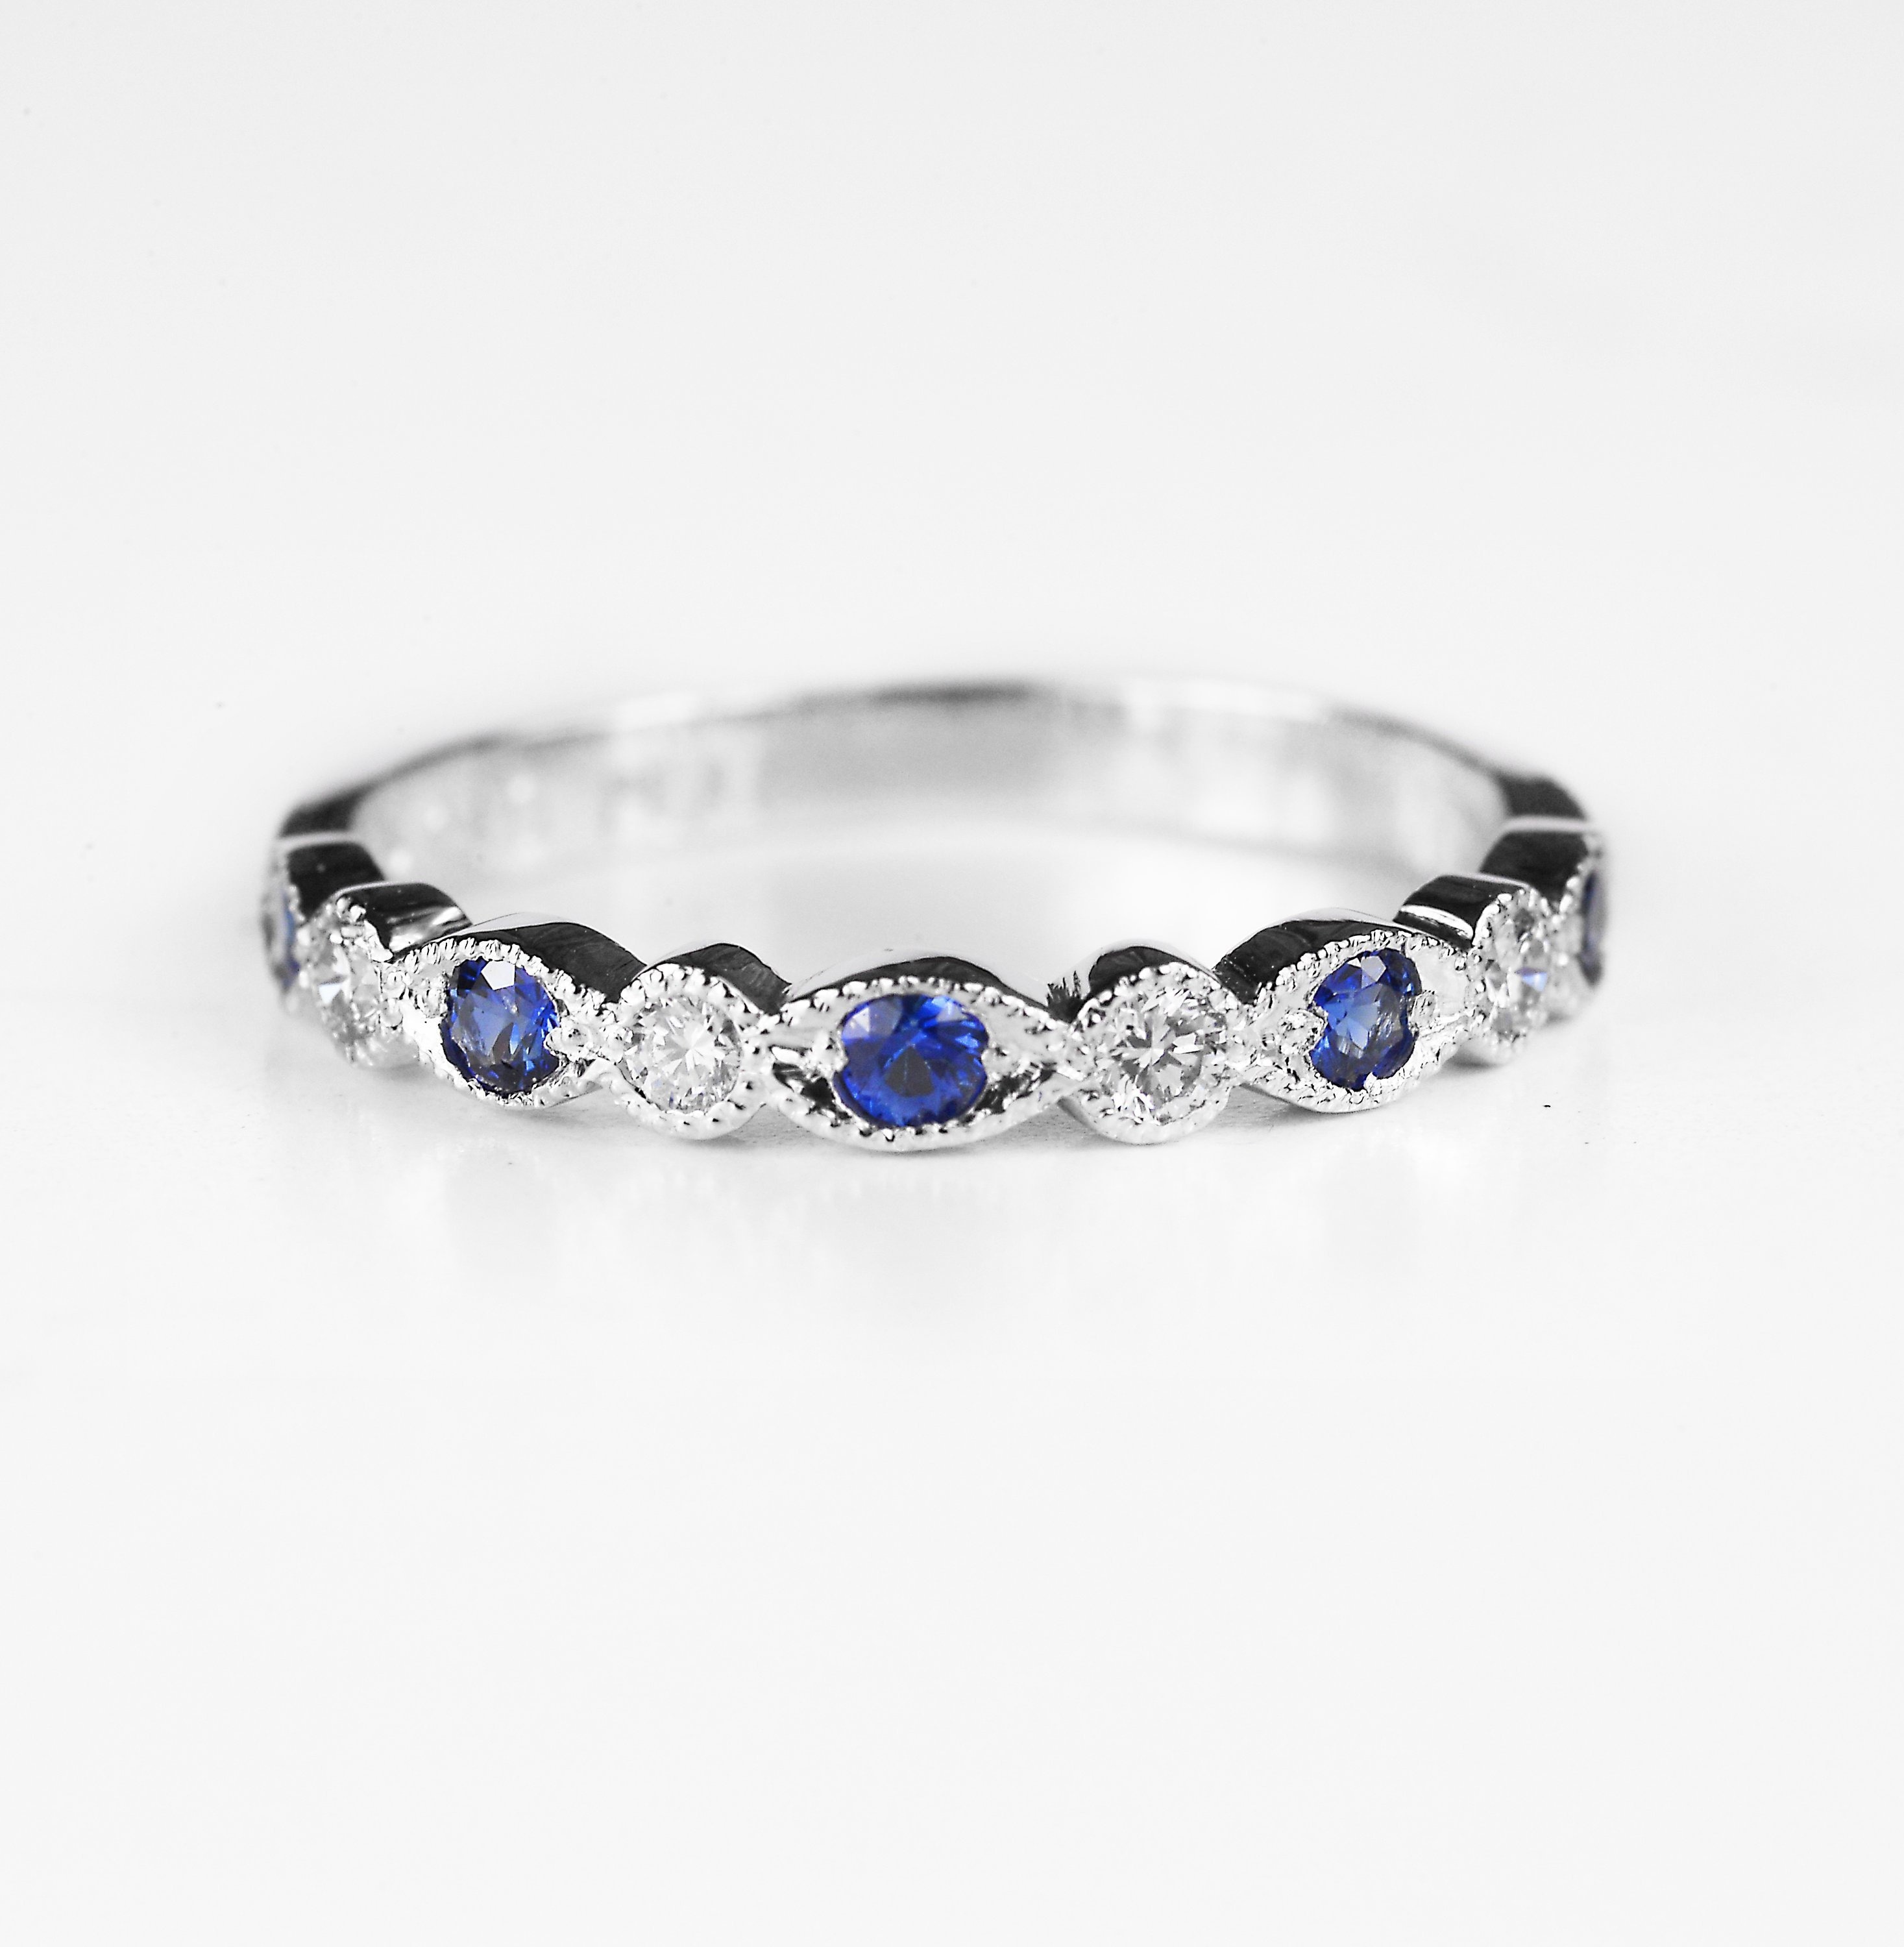 Platinum 950 Diamond & Blue Sapphire Art Deco Antique Style Half Eternity Band, Wedding Stackable Rings, Made To Order